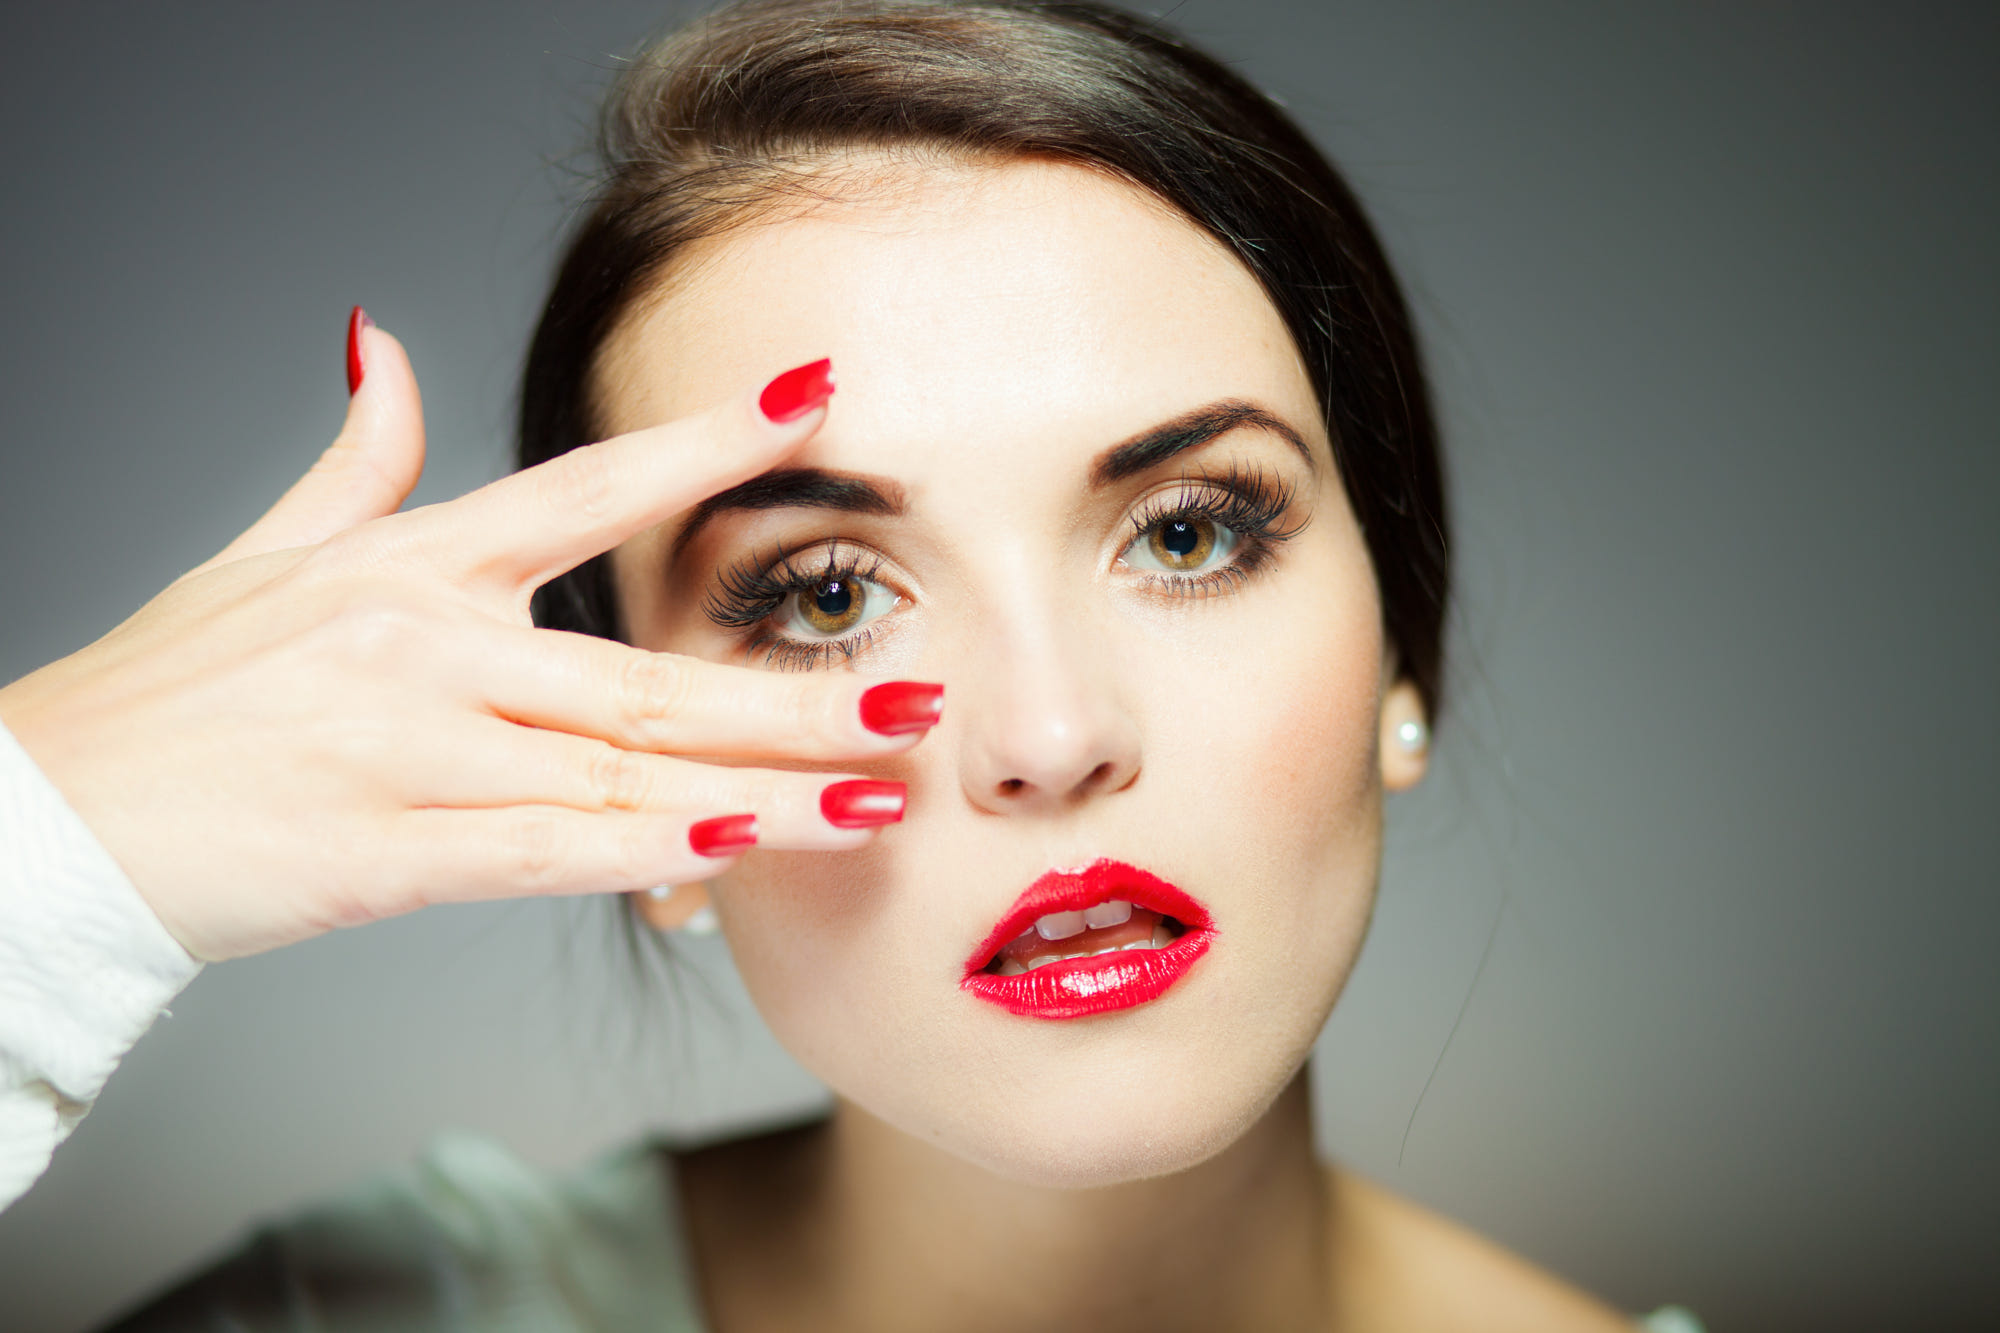 People 2000x1333 model 500px red nails manicured nails acrylic nails women